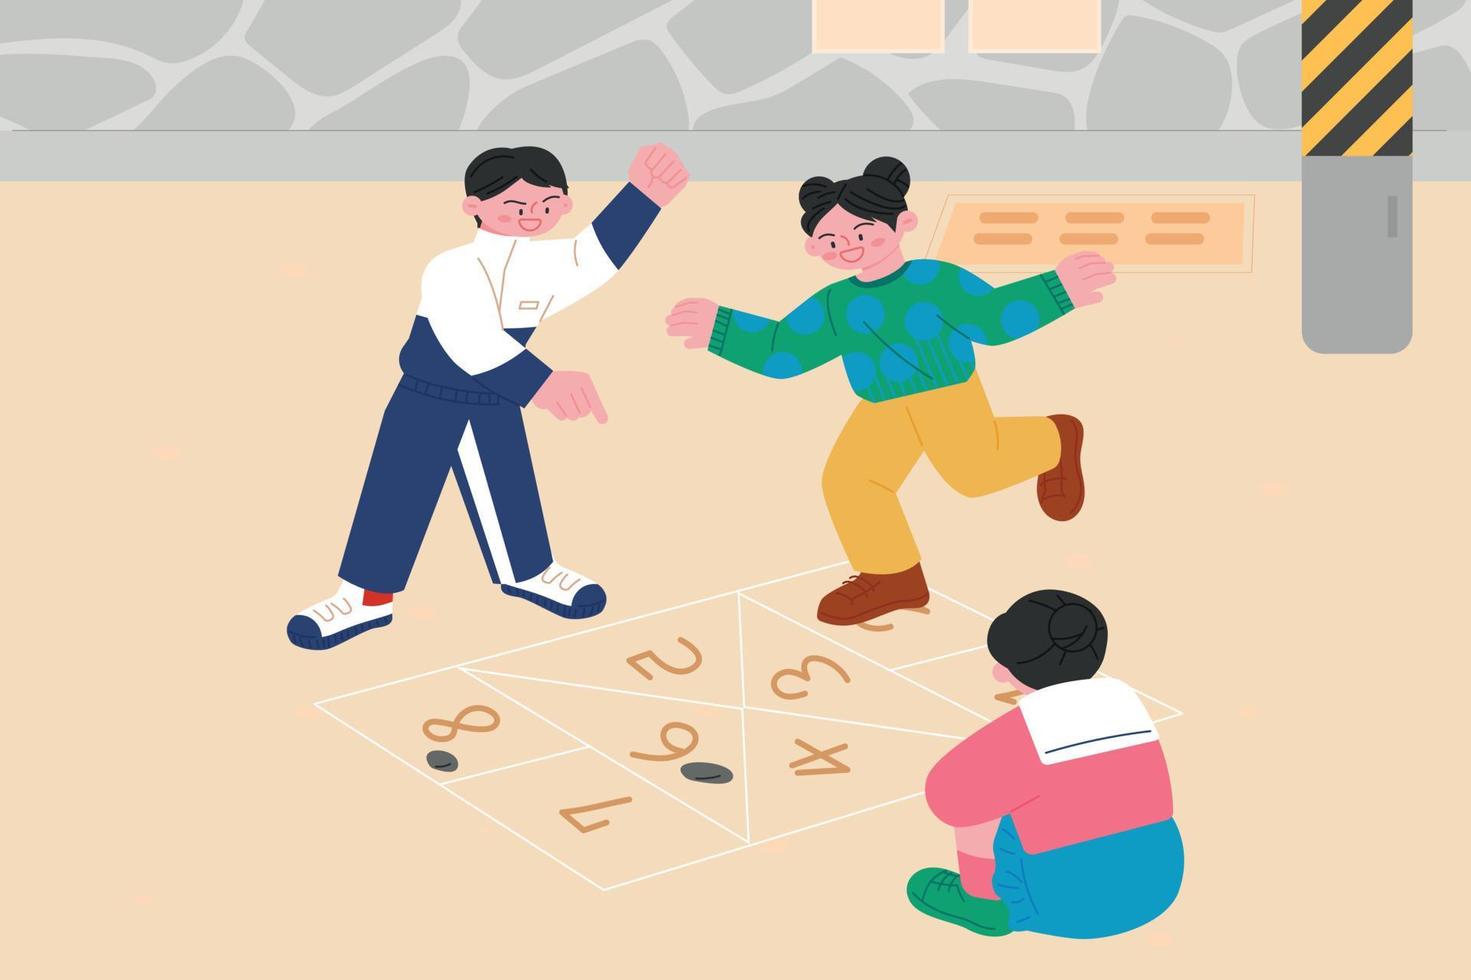 Korean childhood games. Children are drawing lines on the floor and playing a game of hopscotch. vector